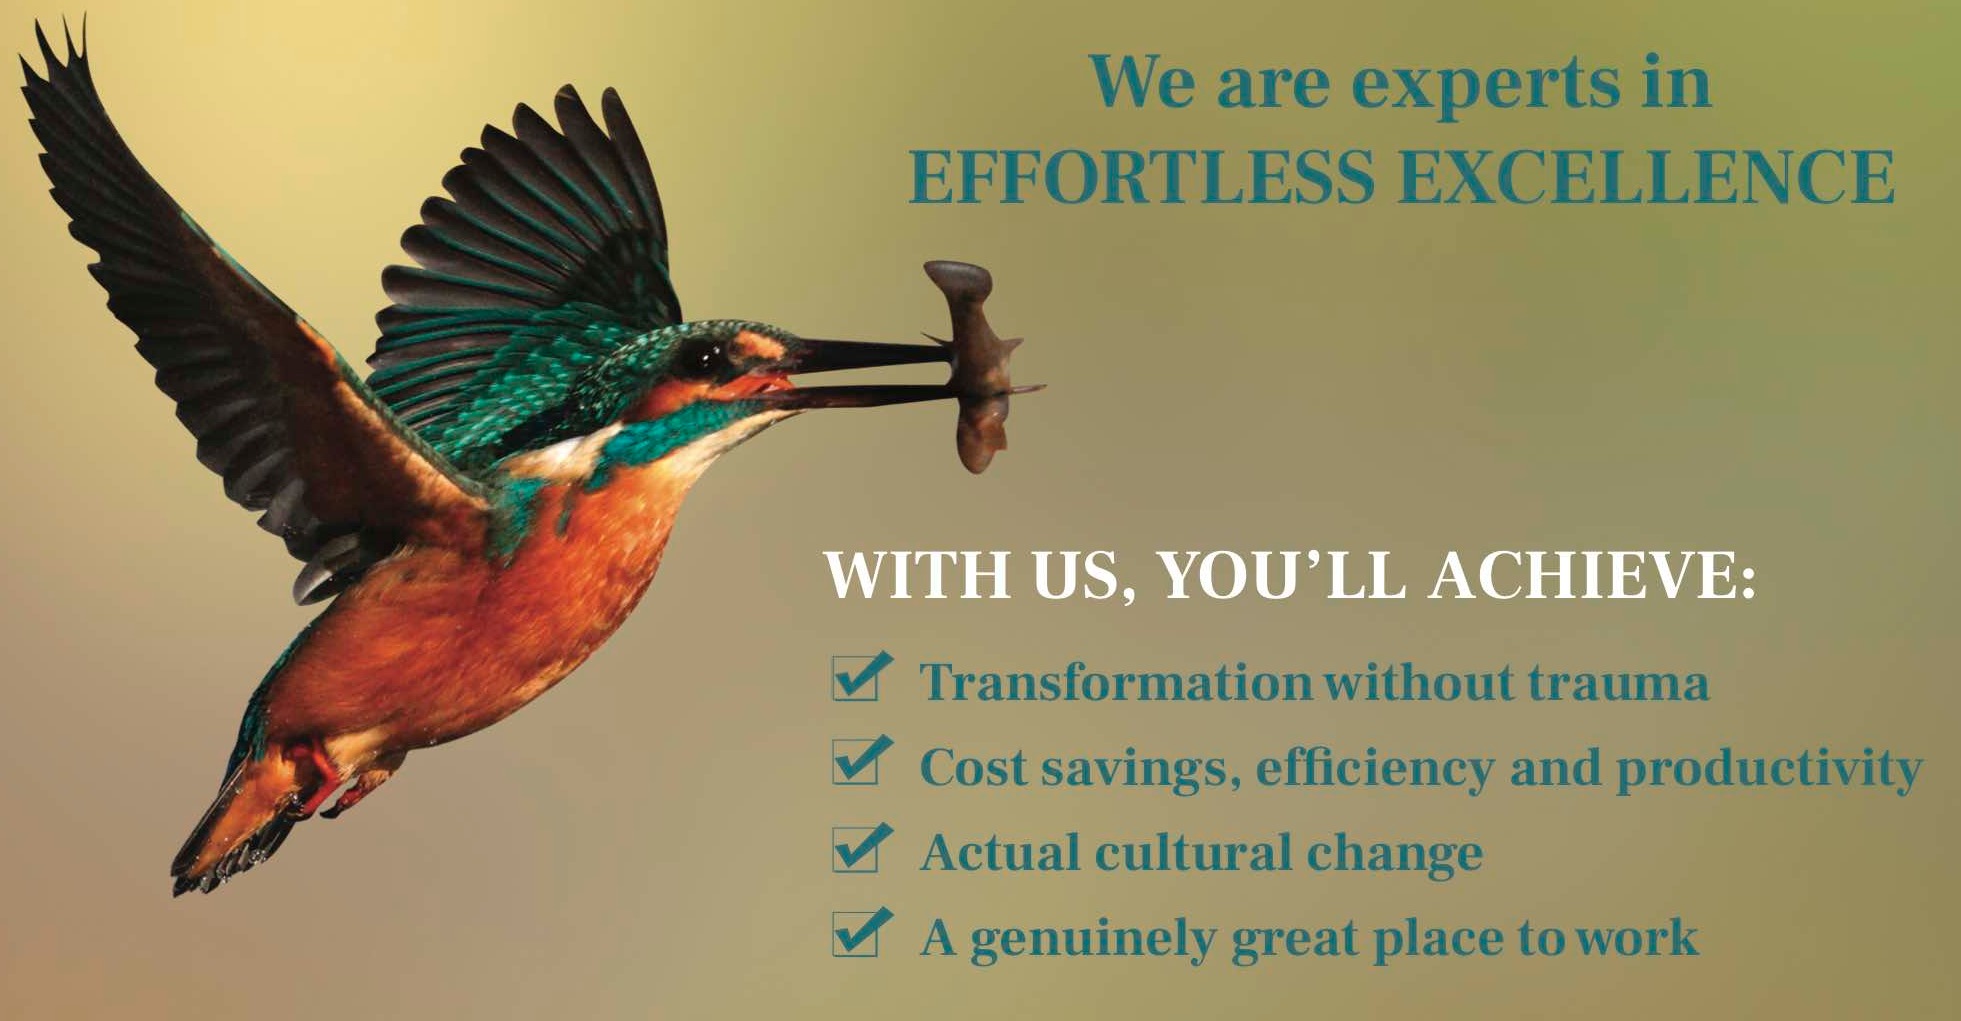 An advert for Effortless Excellence, Transformation without trauma, showing a kingfisher bird effortlessly catching its prey.